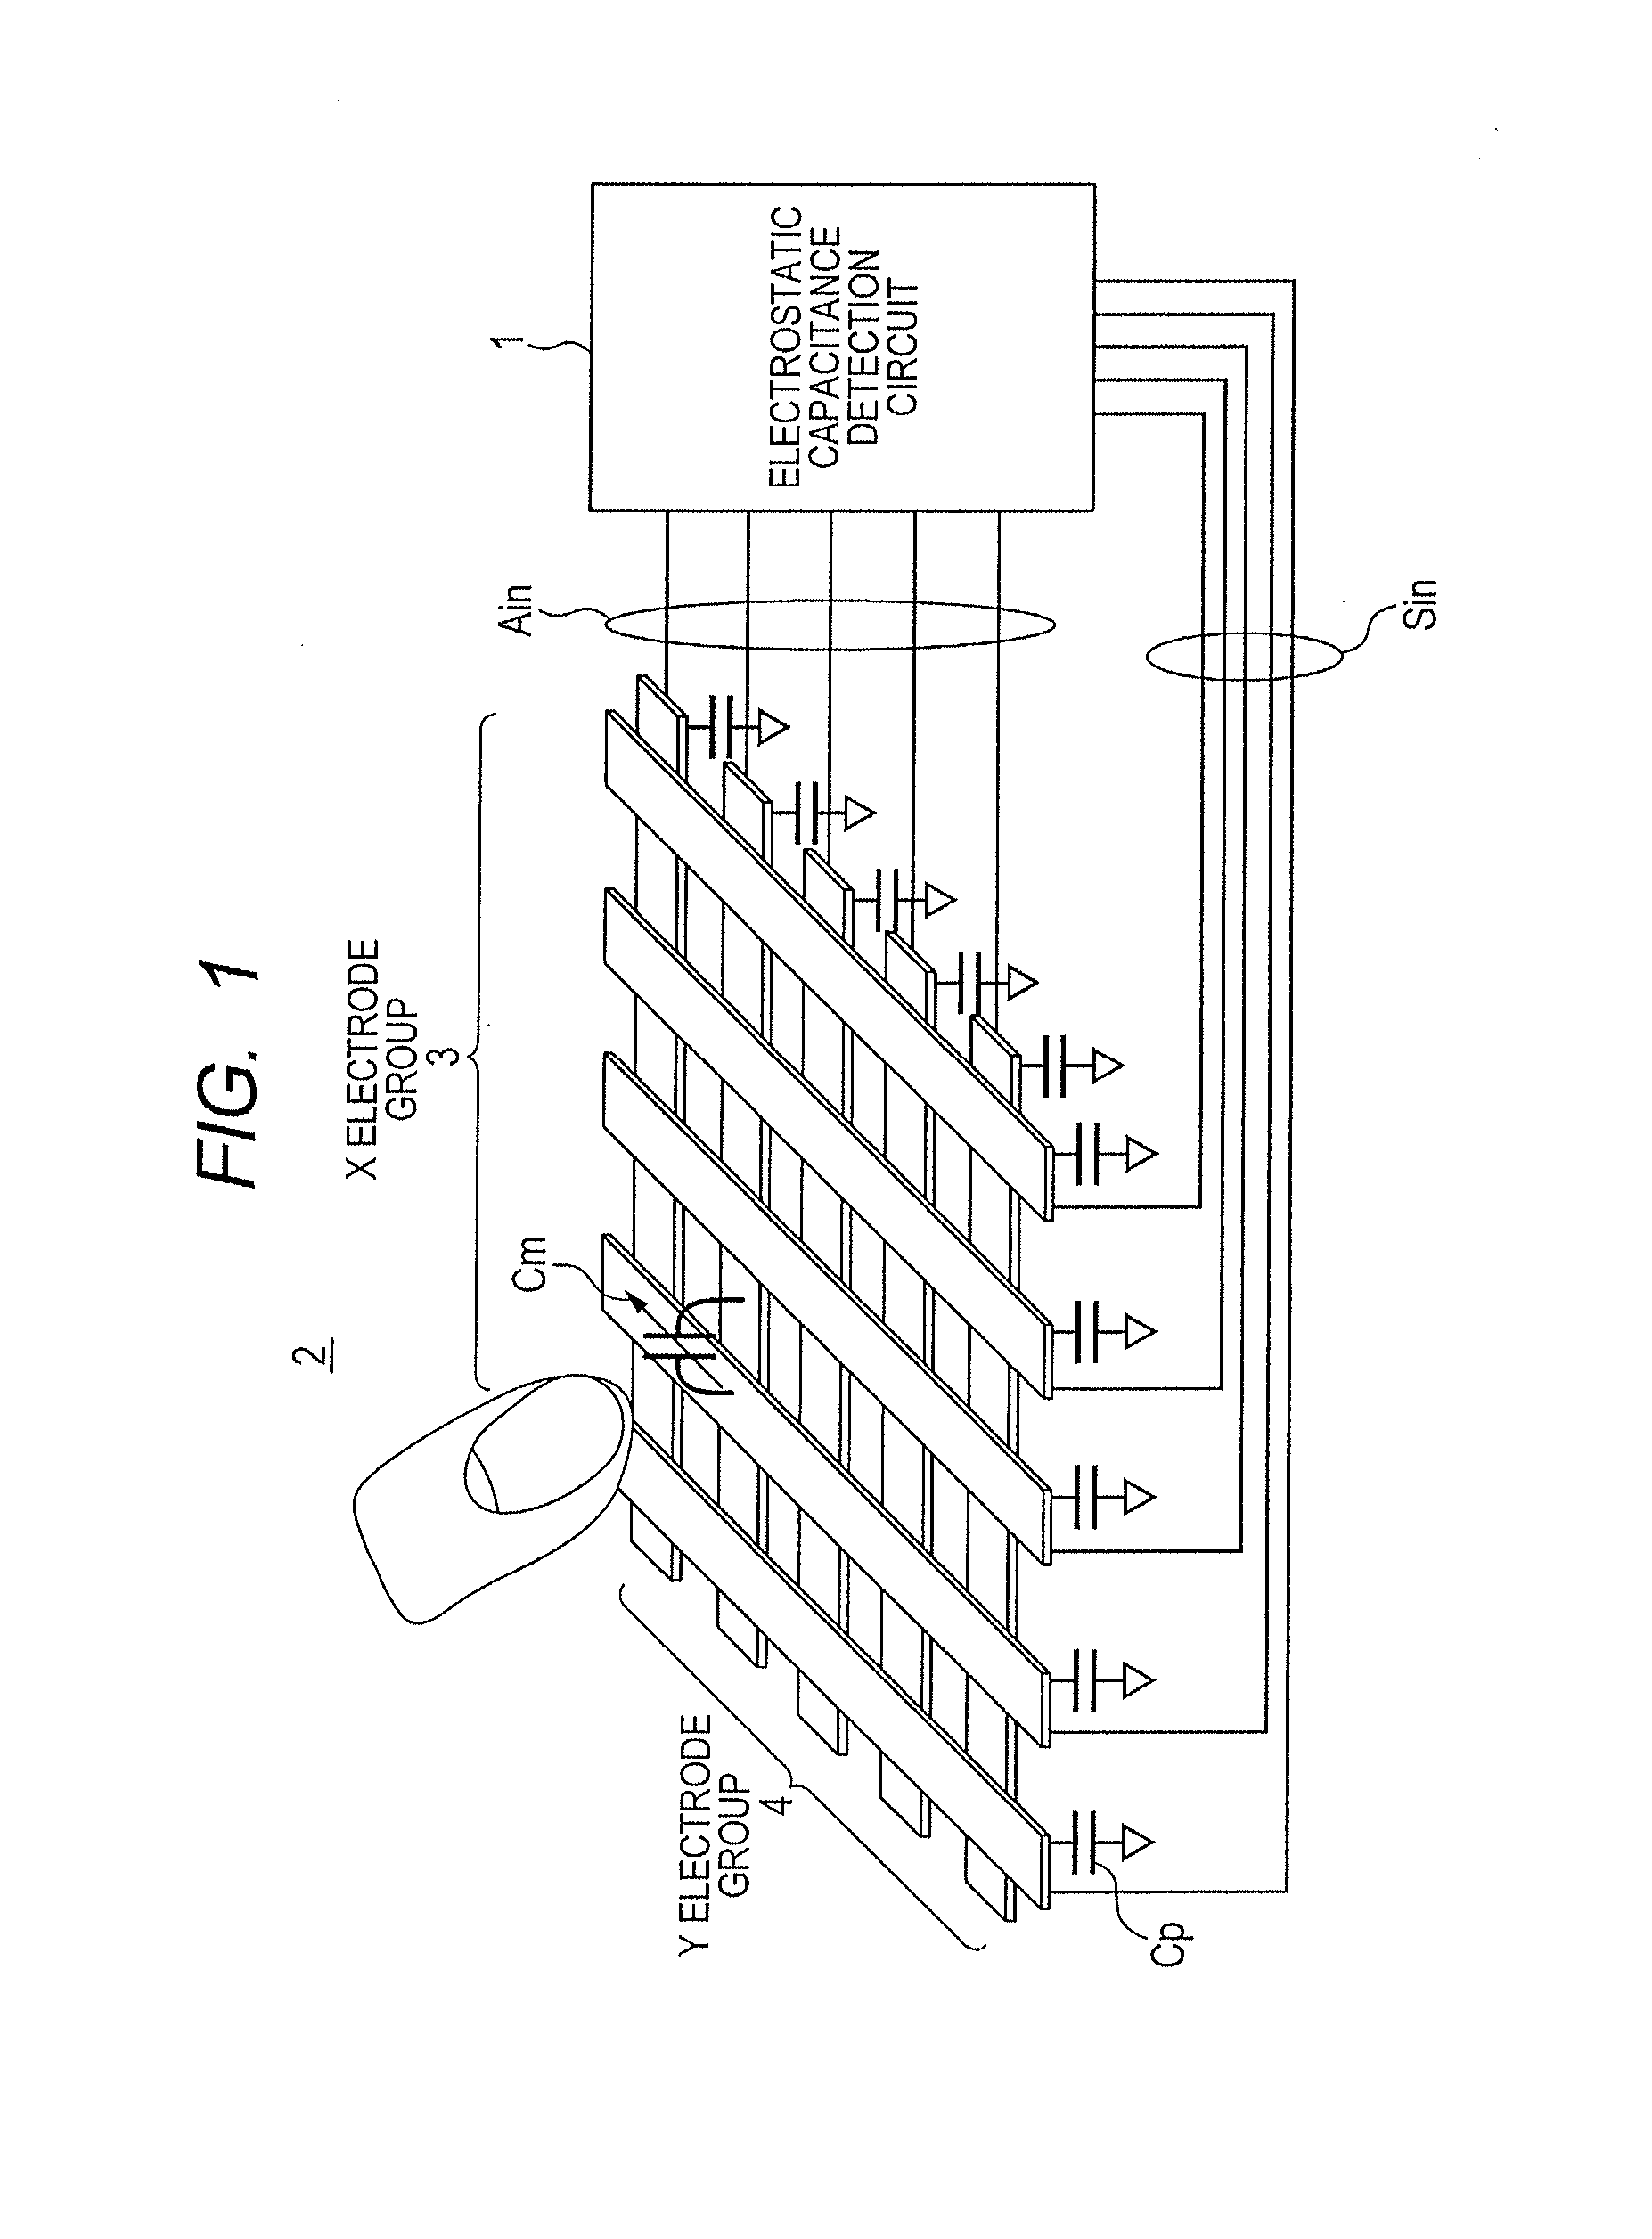 Electrostatic capacitance detection circuit and input device